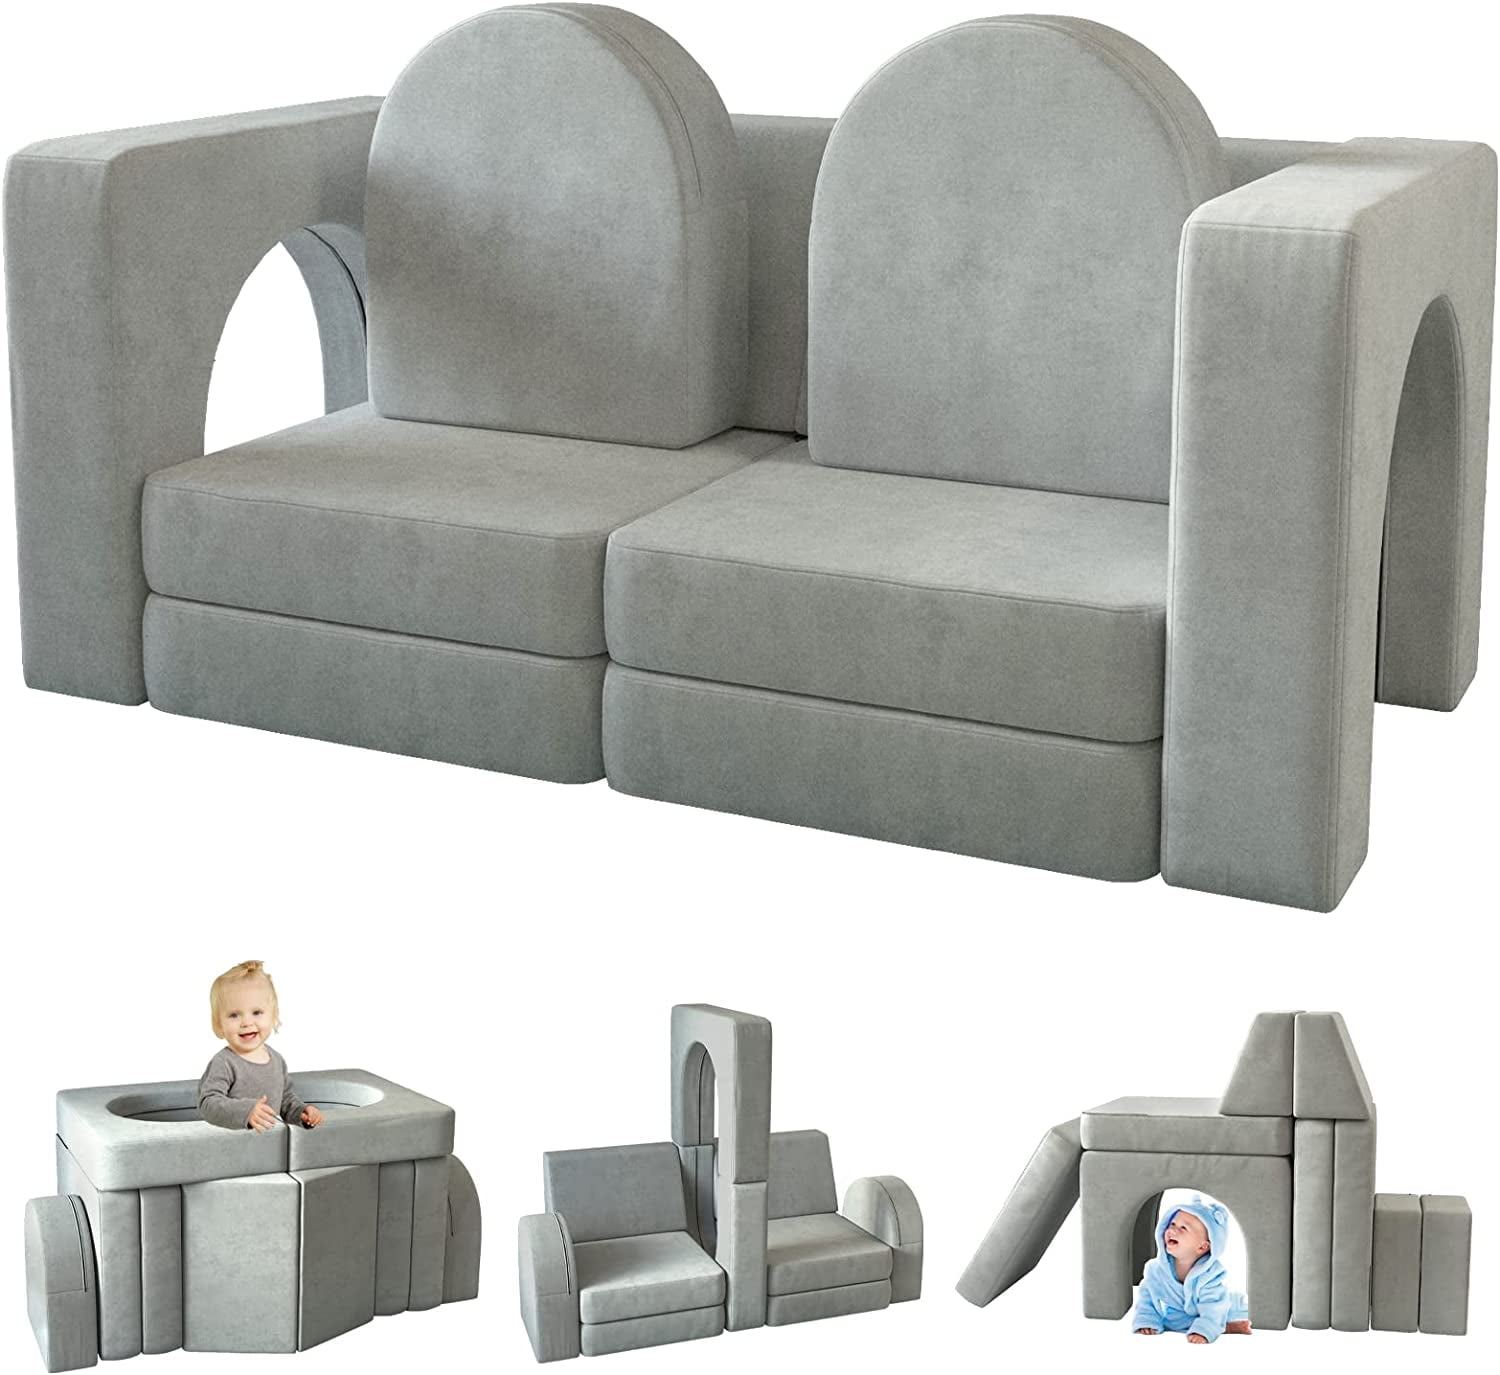 Kids Couch 12PCS, Linor Modular Toddler Velvet Multifunctional Couch, for Kid Playroom, Grey Dutch Couch